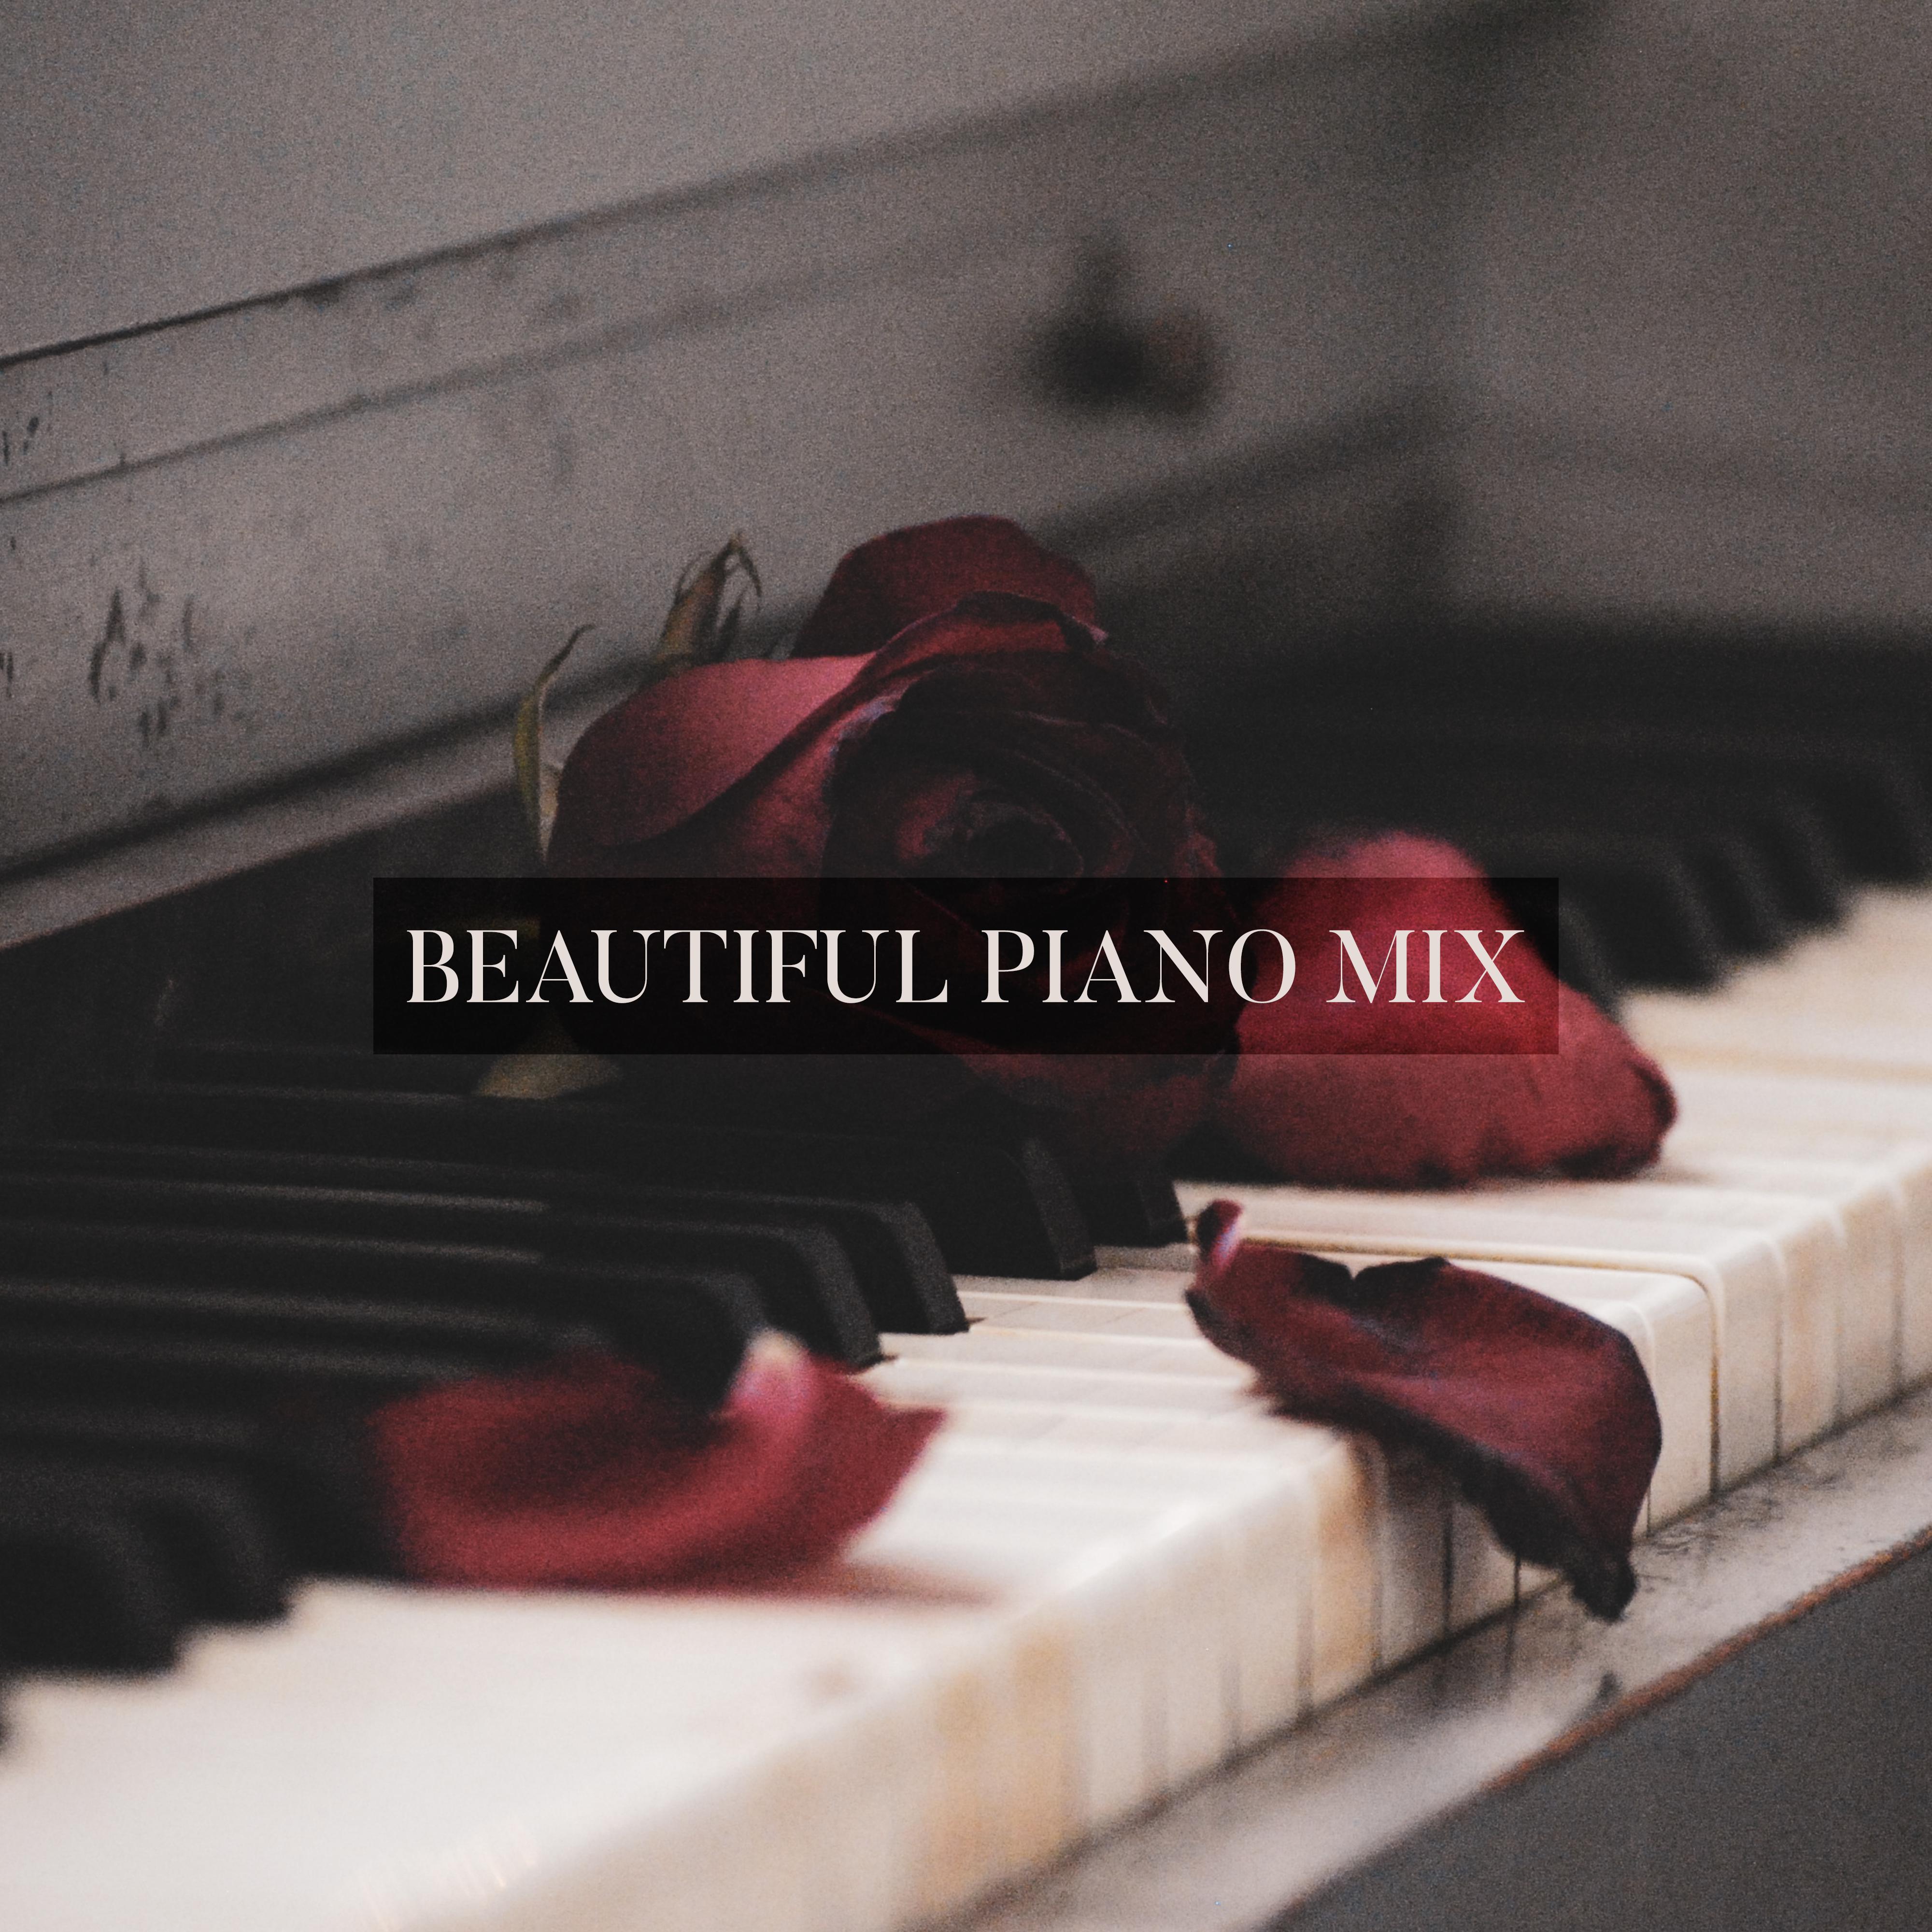 Beautiful Piano Mix – Sensual Instrumental Songs for Lovers, Piano Music, Romantic Date, Jazz Music Ambient